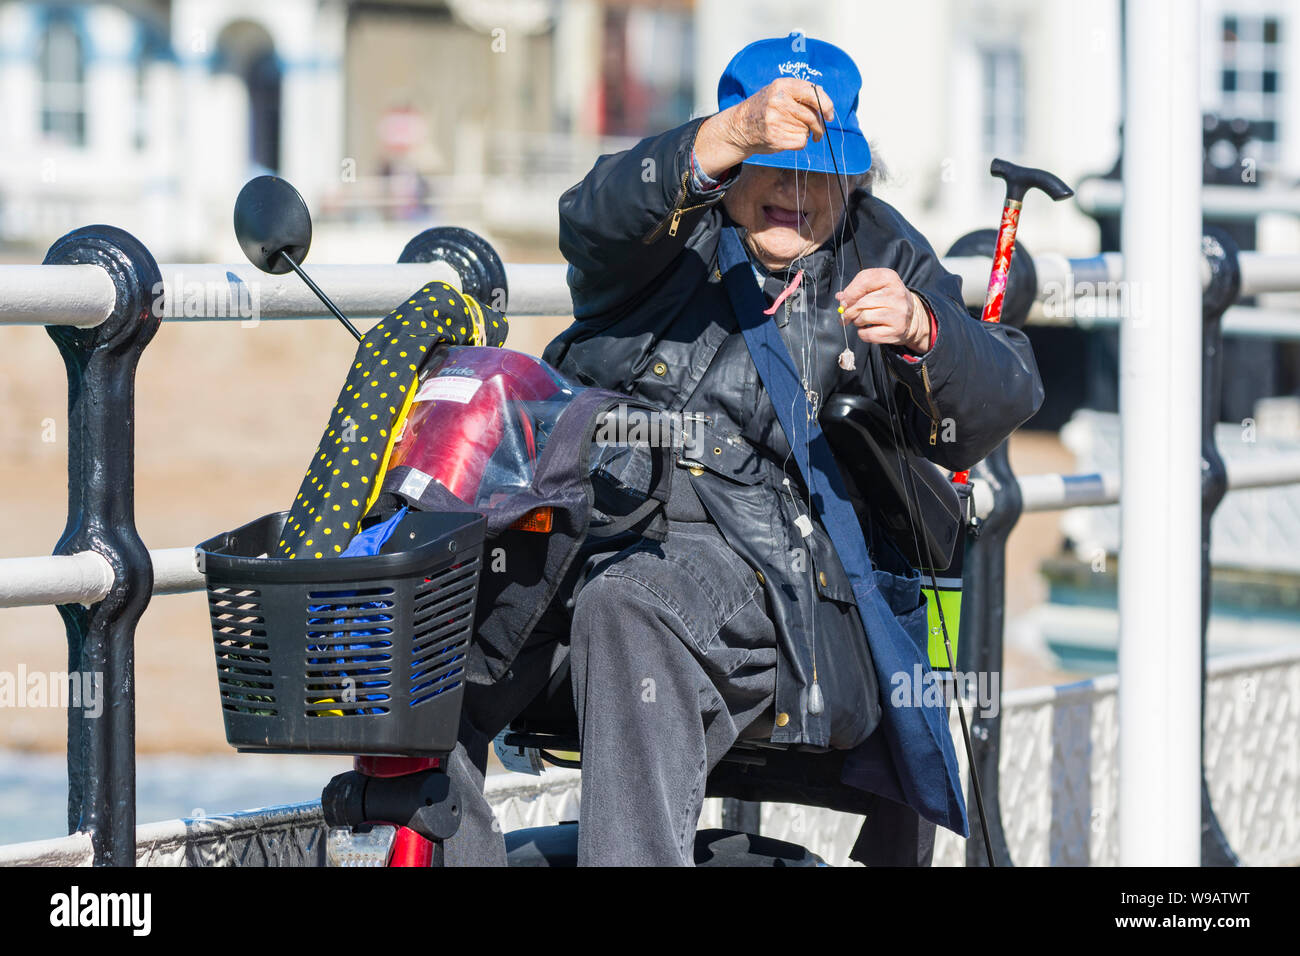 Active senior disabled woman in a mobility scooter preparing a fishing line. Stock Photo